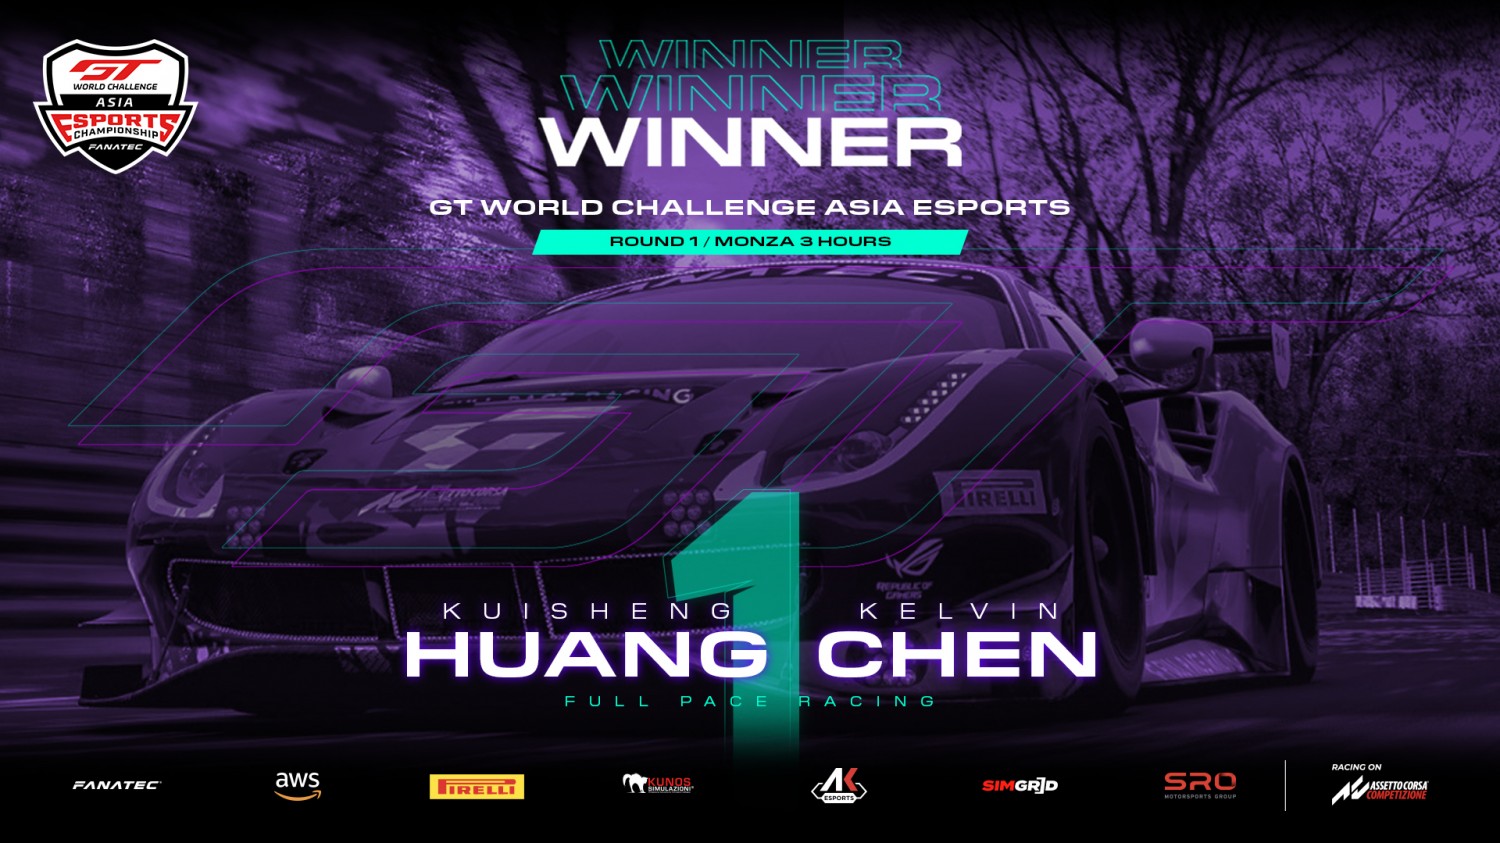 Full Pace’s Huang/Chen beat JMX Phantom to Endurance Series victory in Monza 3 Hours thriller